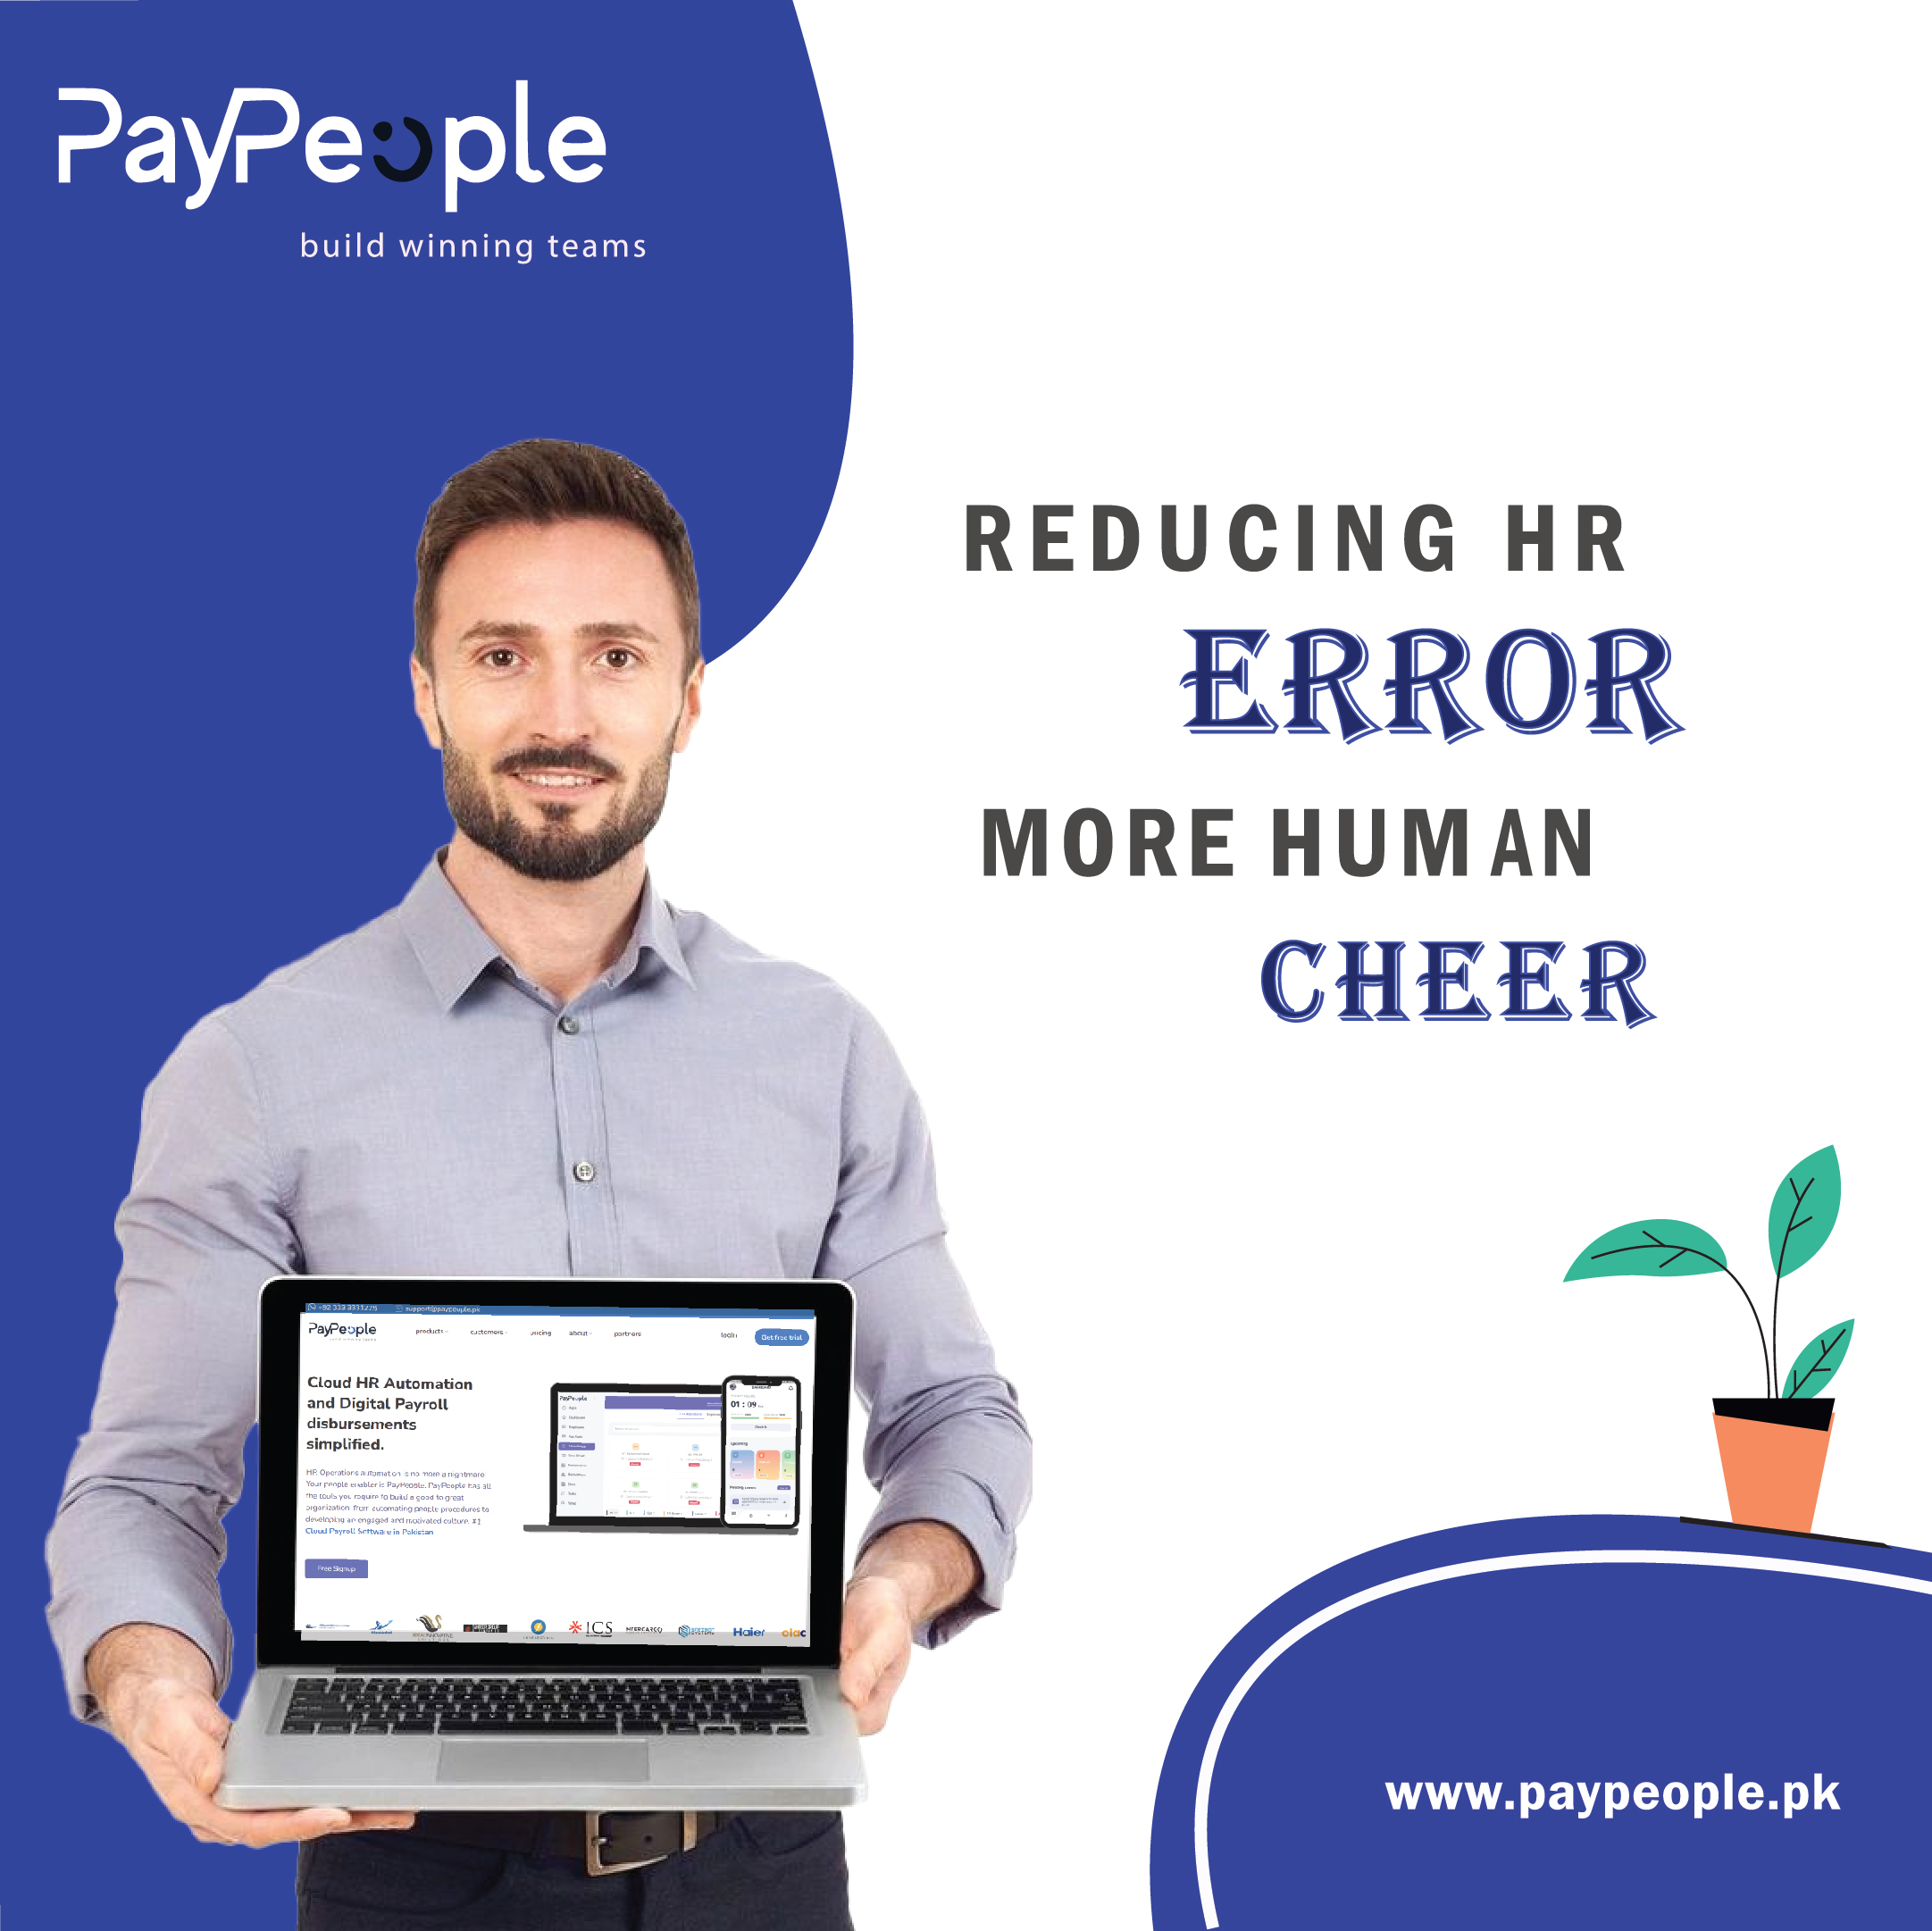 Can HRIS in Pakistan handle payroll processing efficiently?